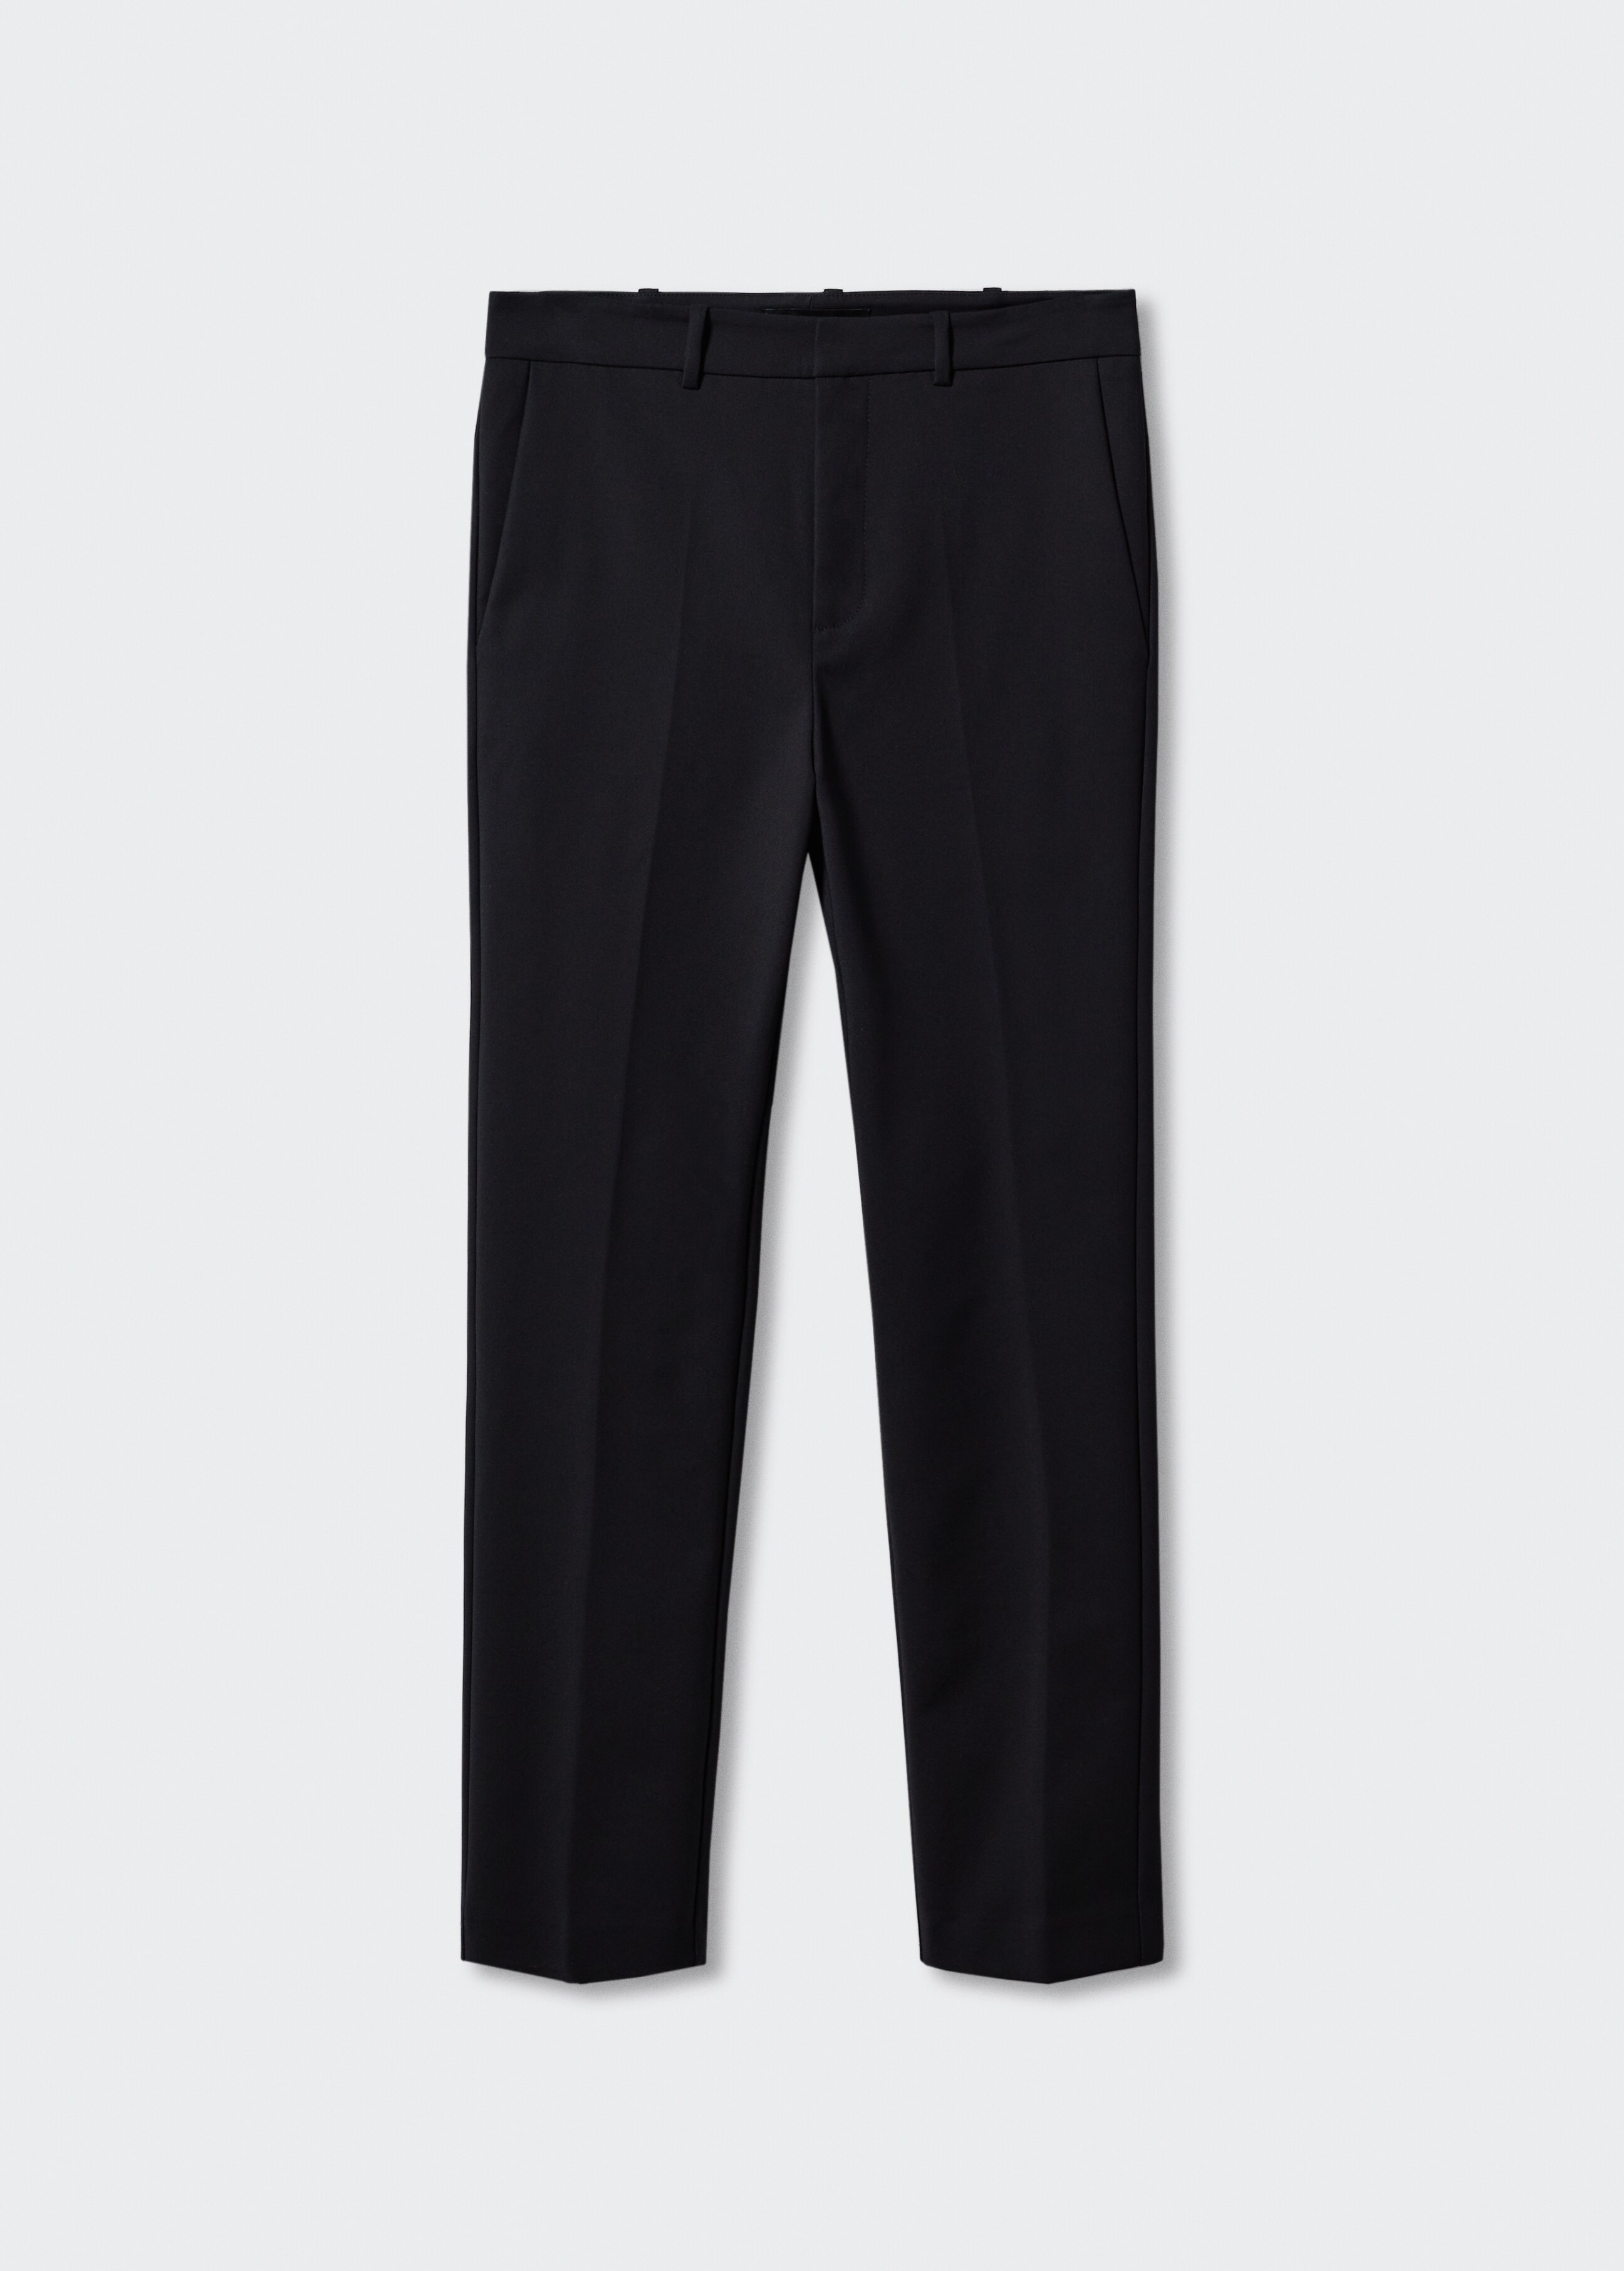 Skinny suit trousers - Article without model